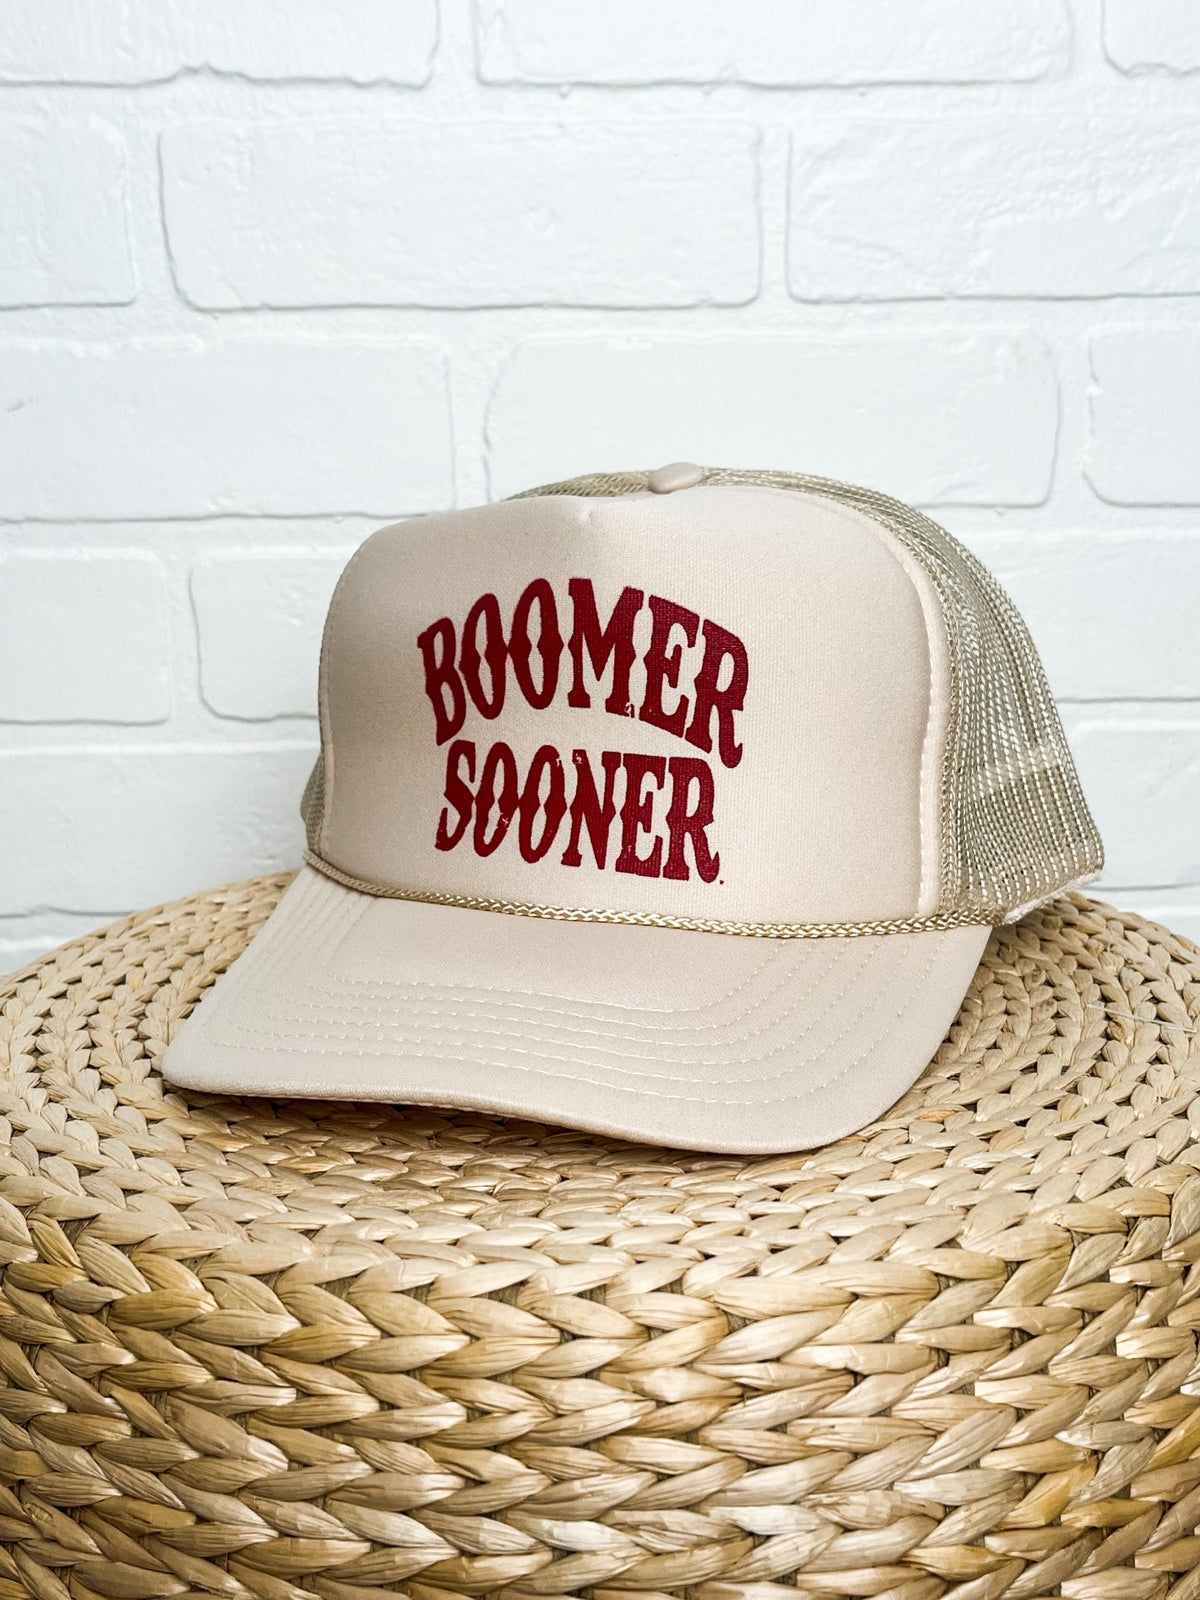 OU OU Boomer Sooner western trucker hat natural Hats Natural | Lush Fashion Lounge Trendy Oklahoma University Sooners Apparel & Cute Gameday T-Shirts